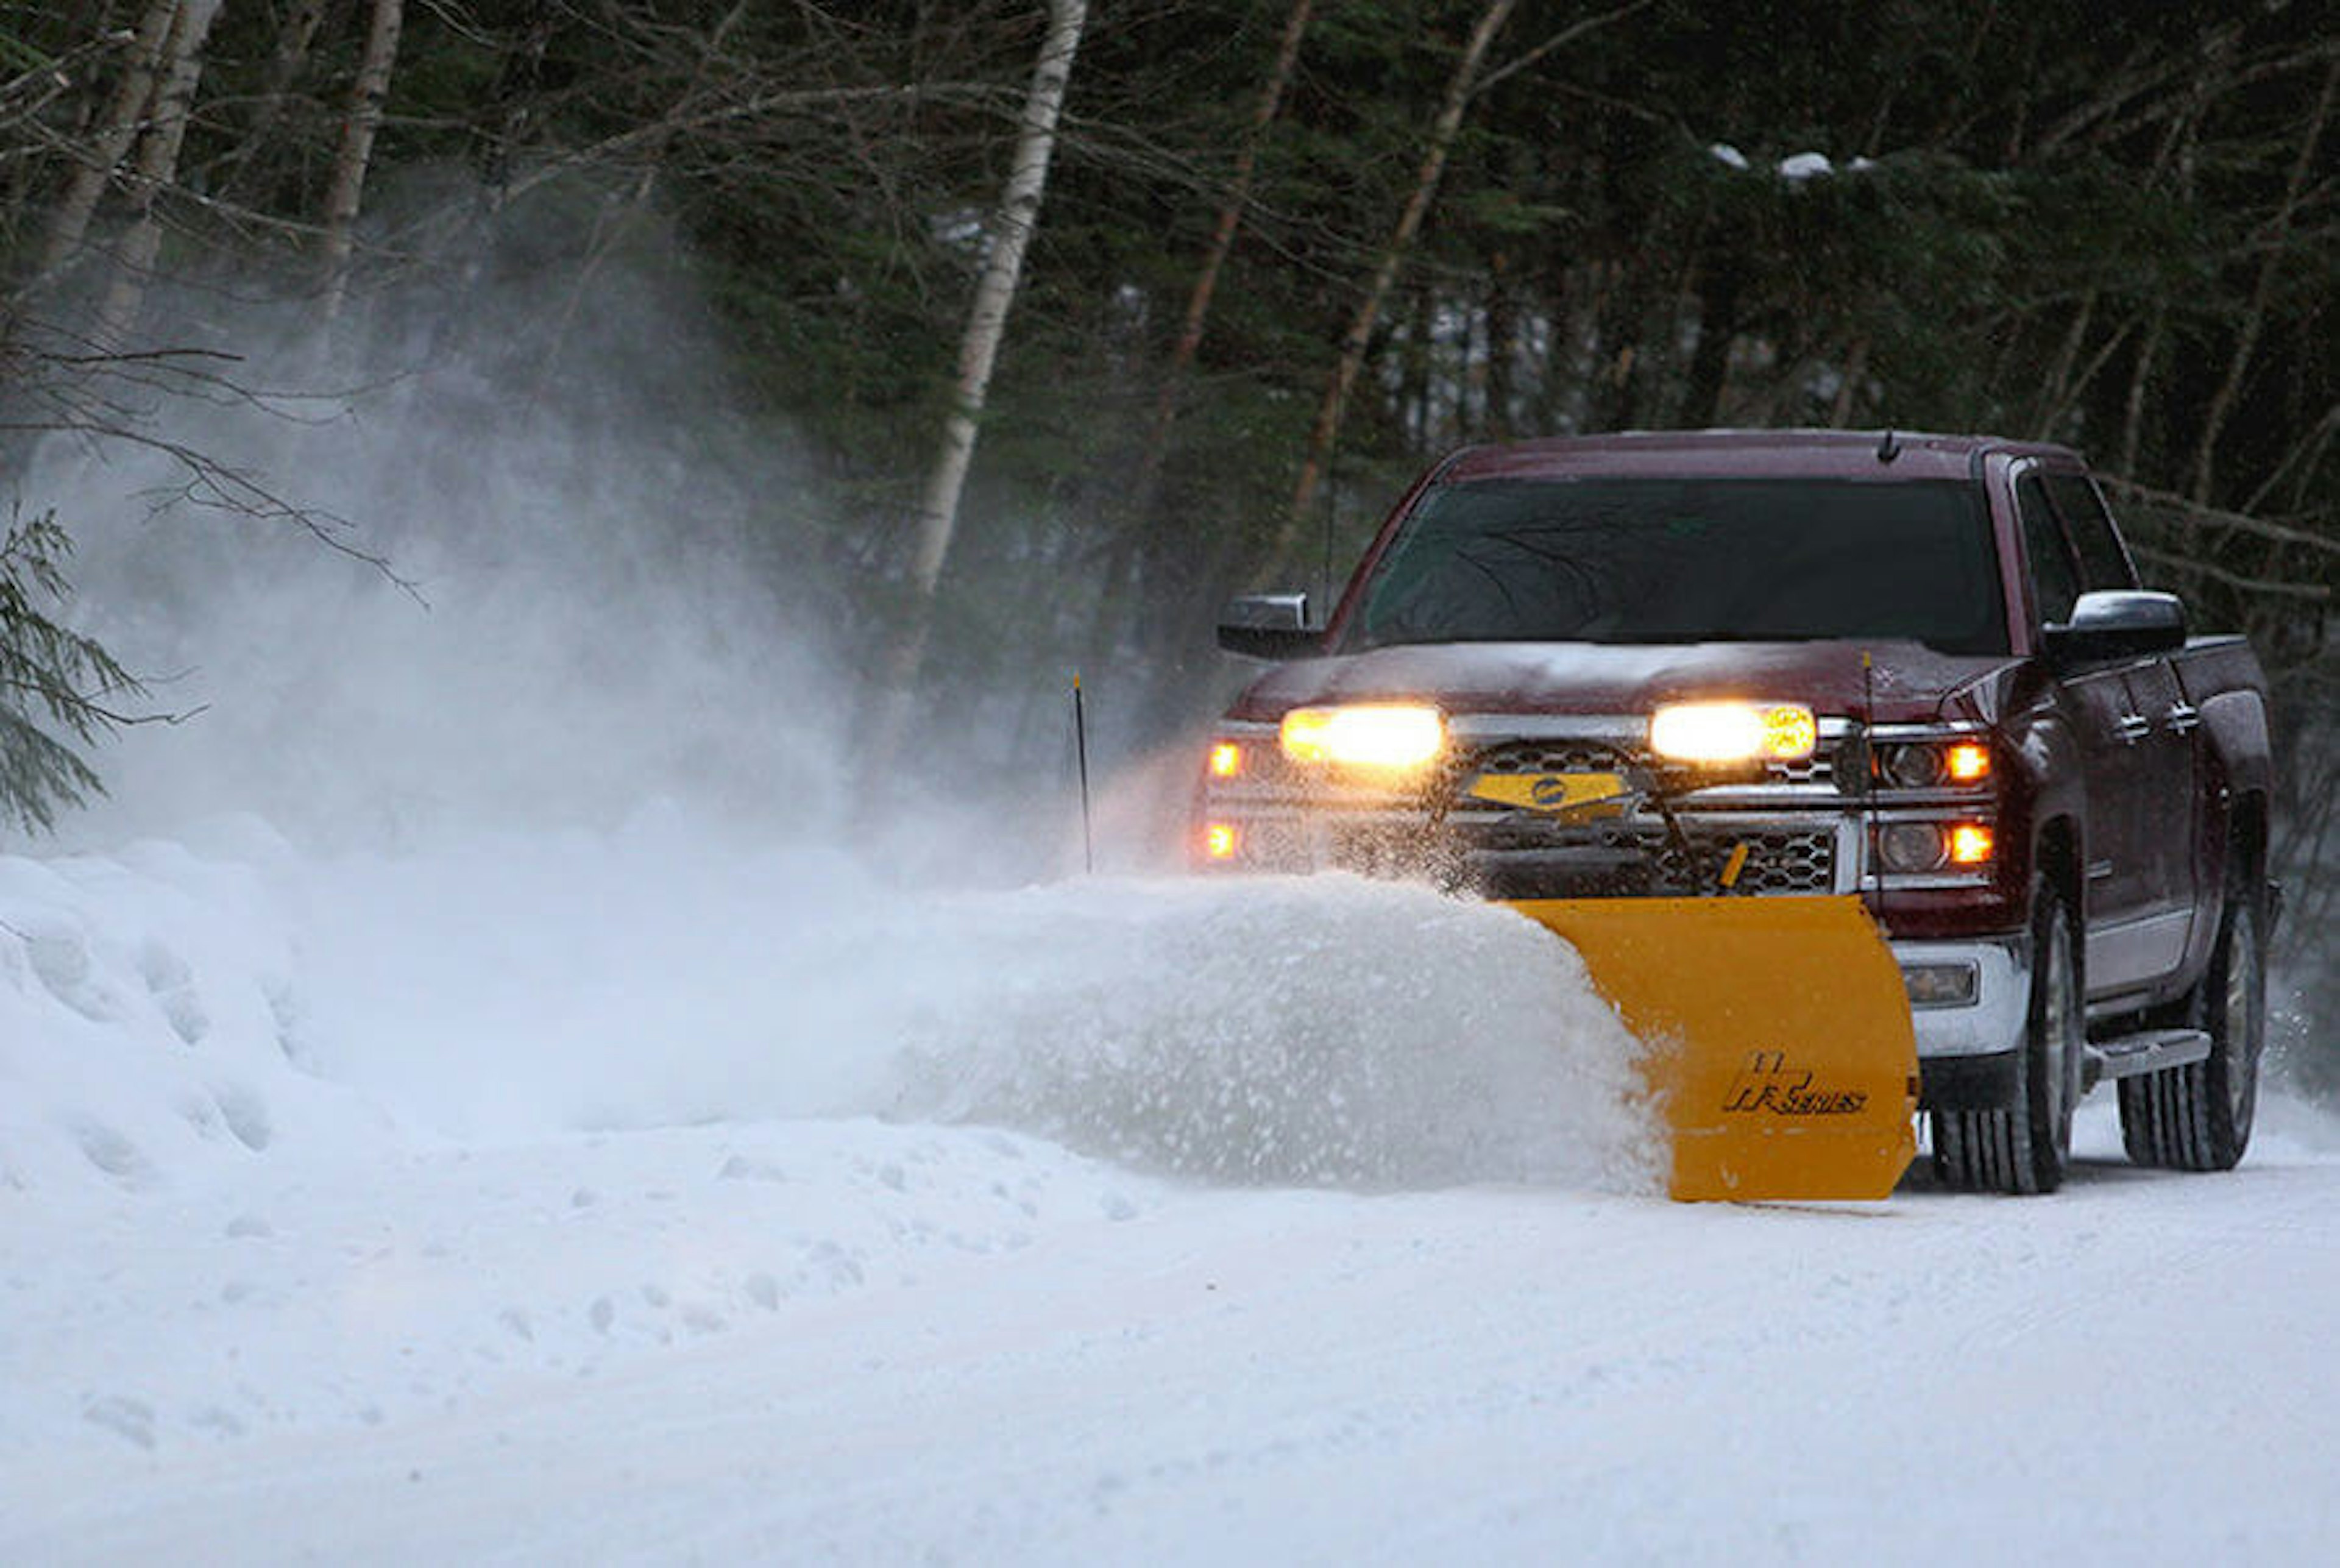 Snow Removal Truck Equipment & Plows